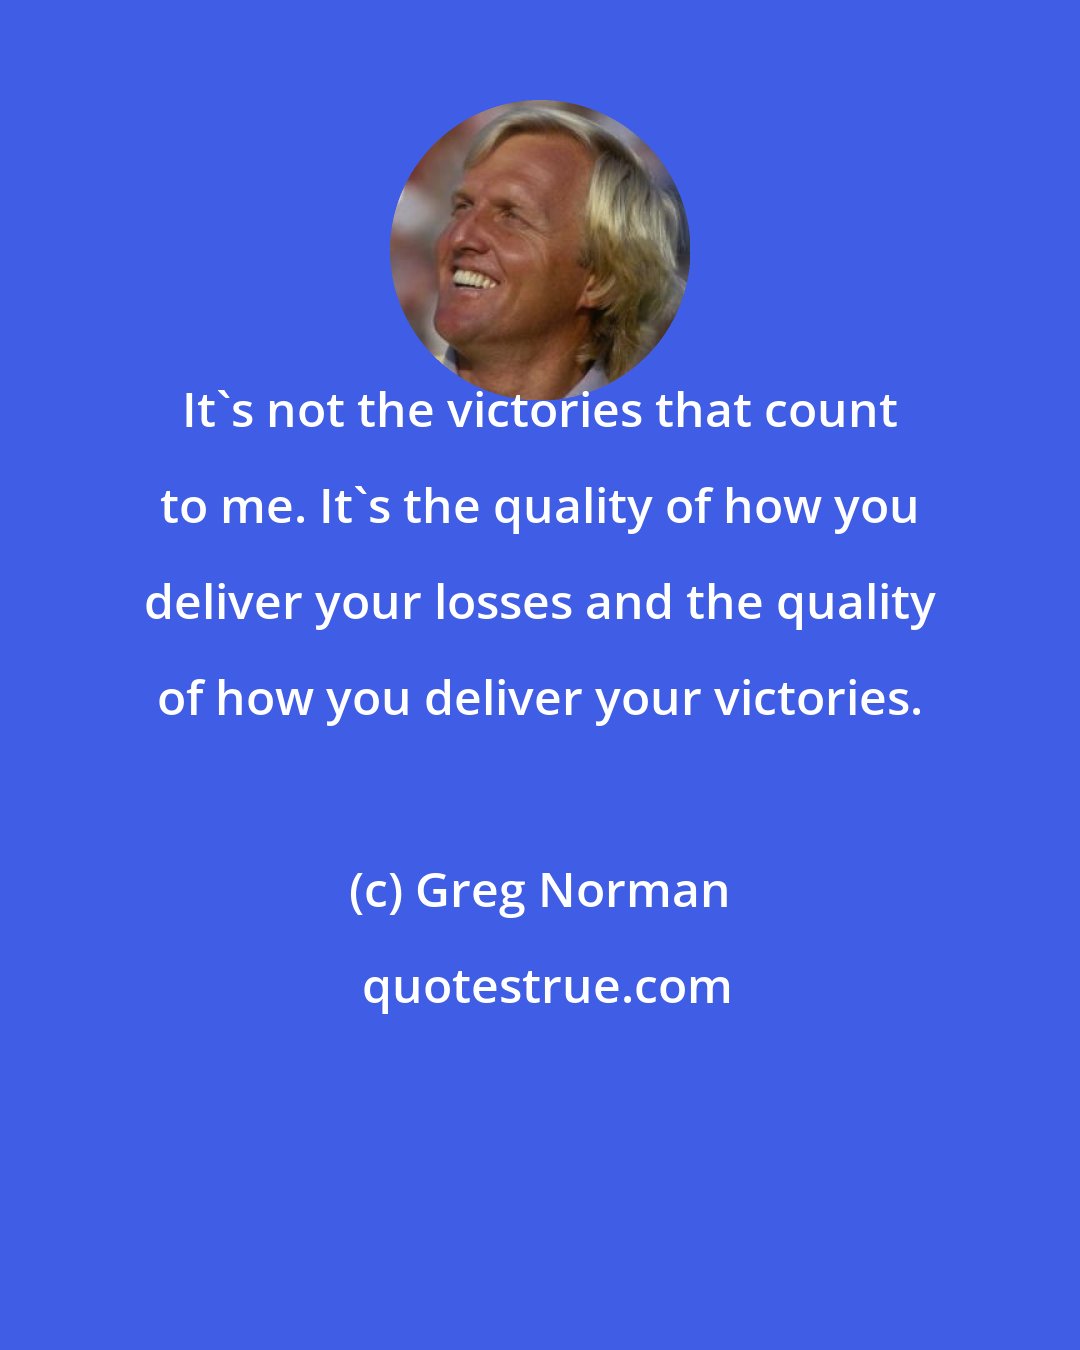 Greg Norman: It's not the victories that count to me. It's the quality of how you deliver your losses and the quality of how you deliver your victories.